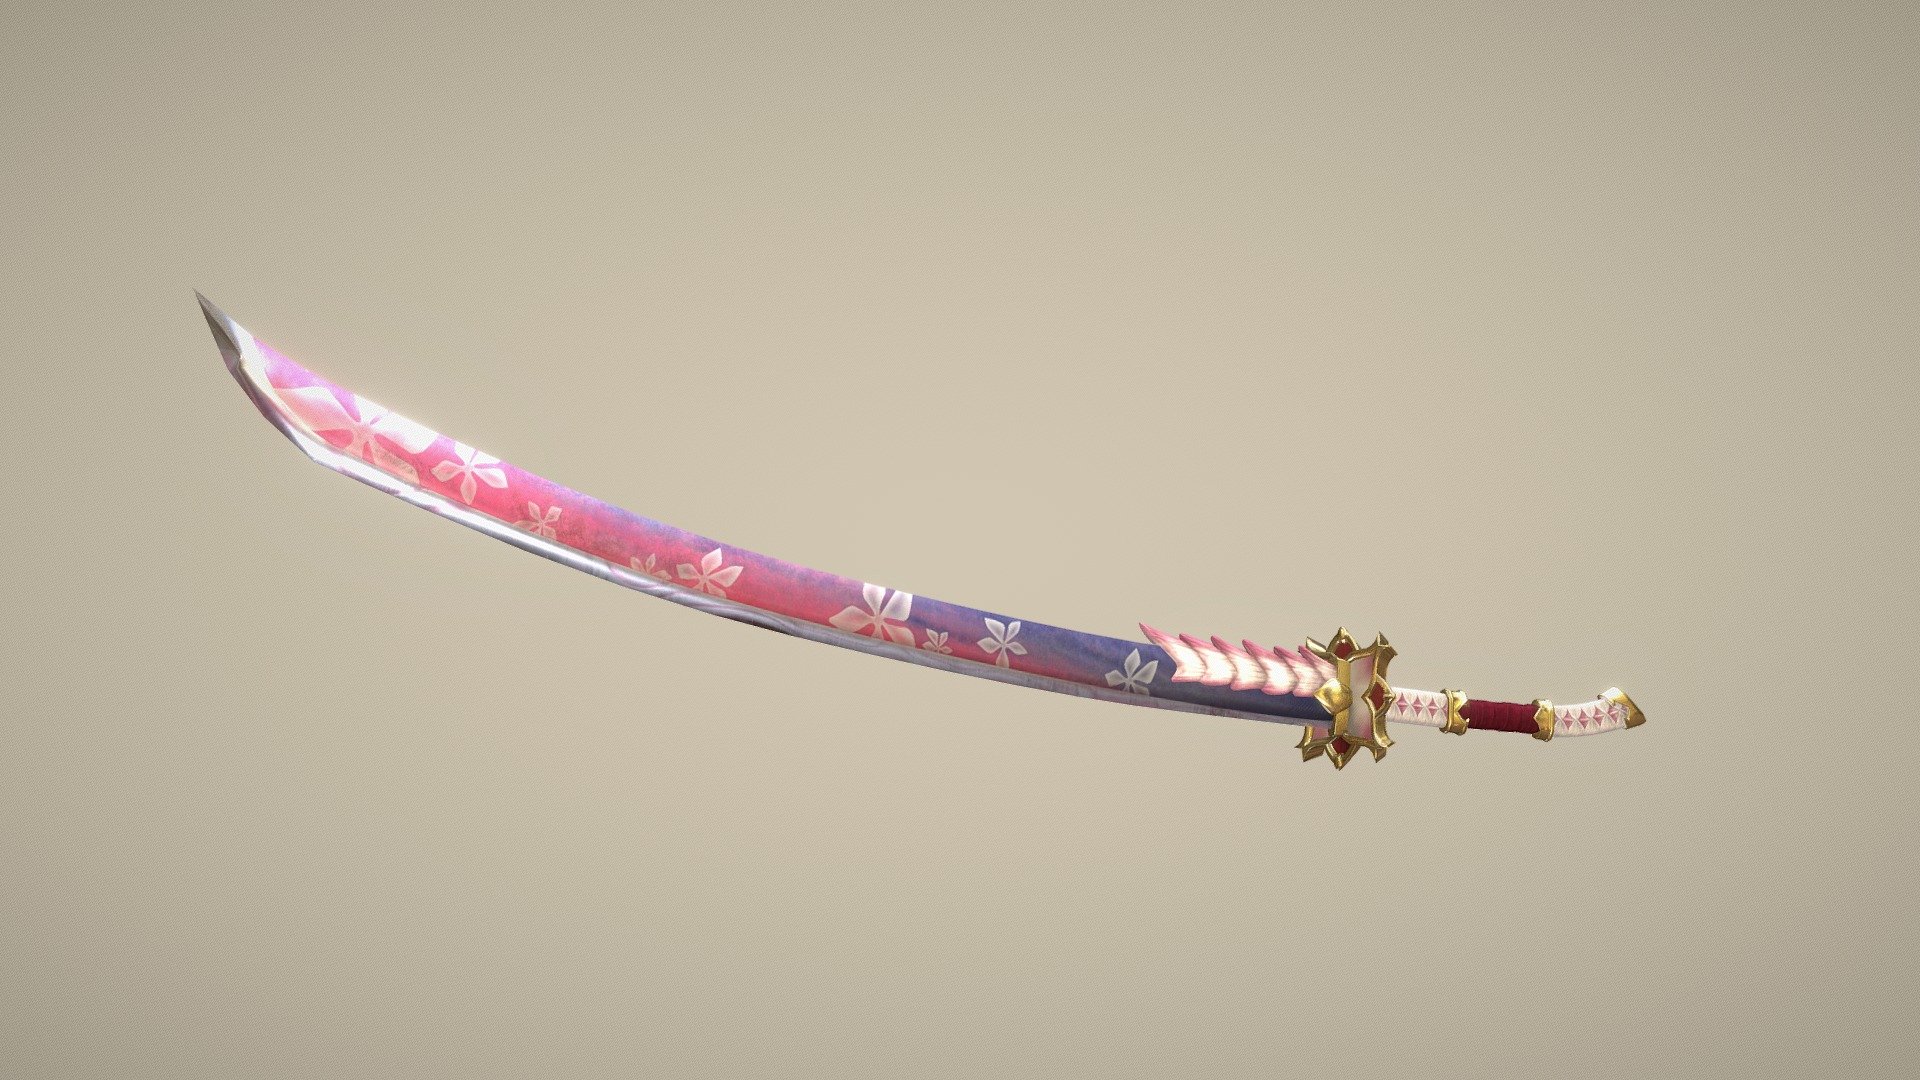 This is a fan art model of the Mizutsune Longsword from Monster Hunter Generations. I had a lot of fun working on it, and I'm happy with how it turned out. I used Maya and Substance Painter 3d model